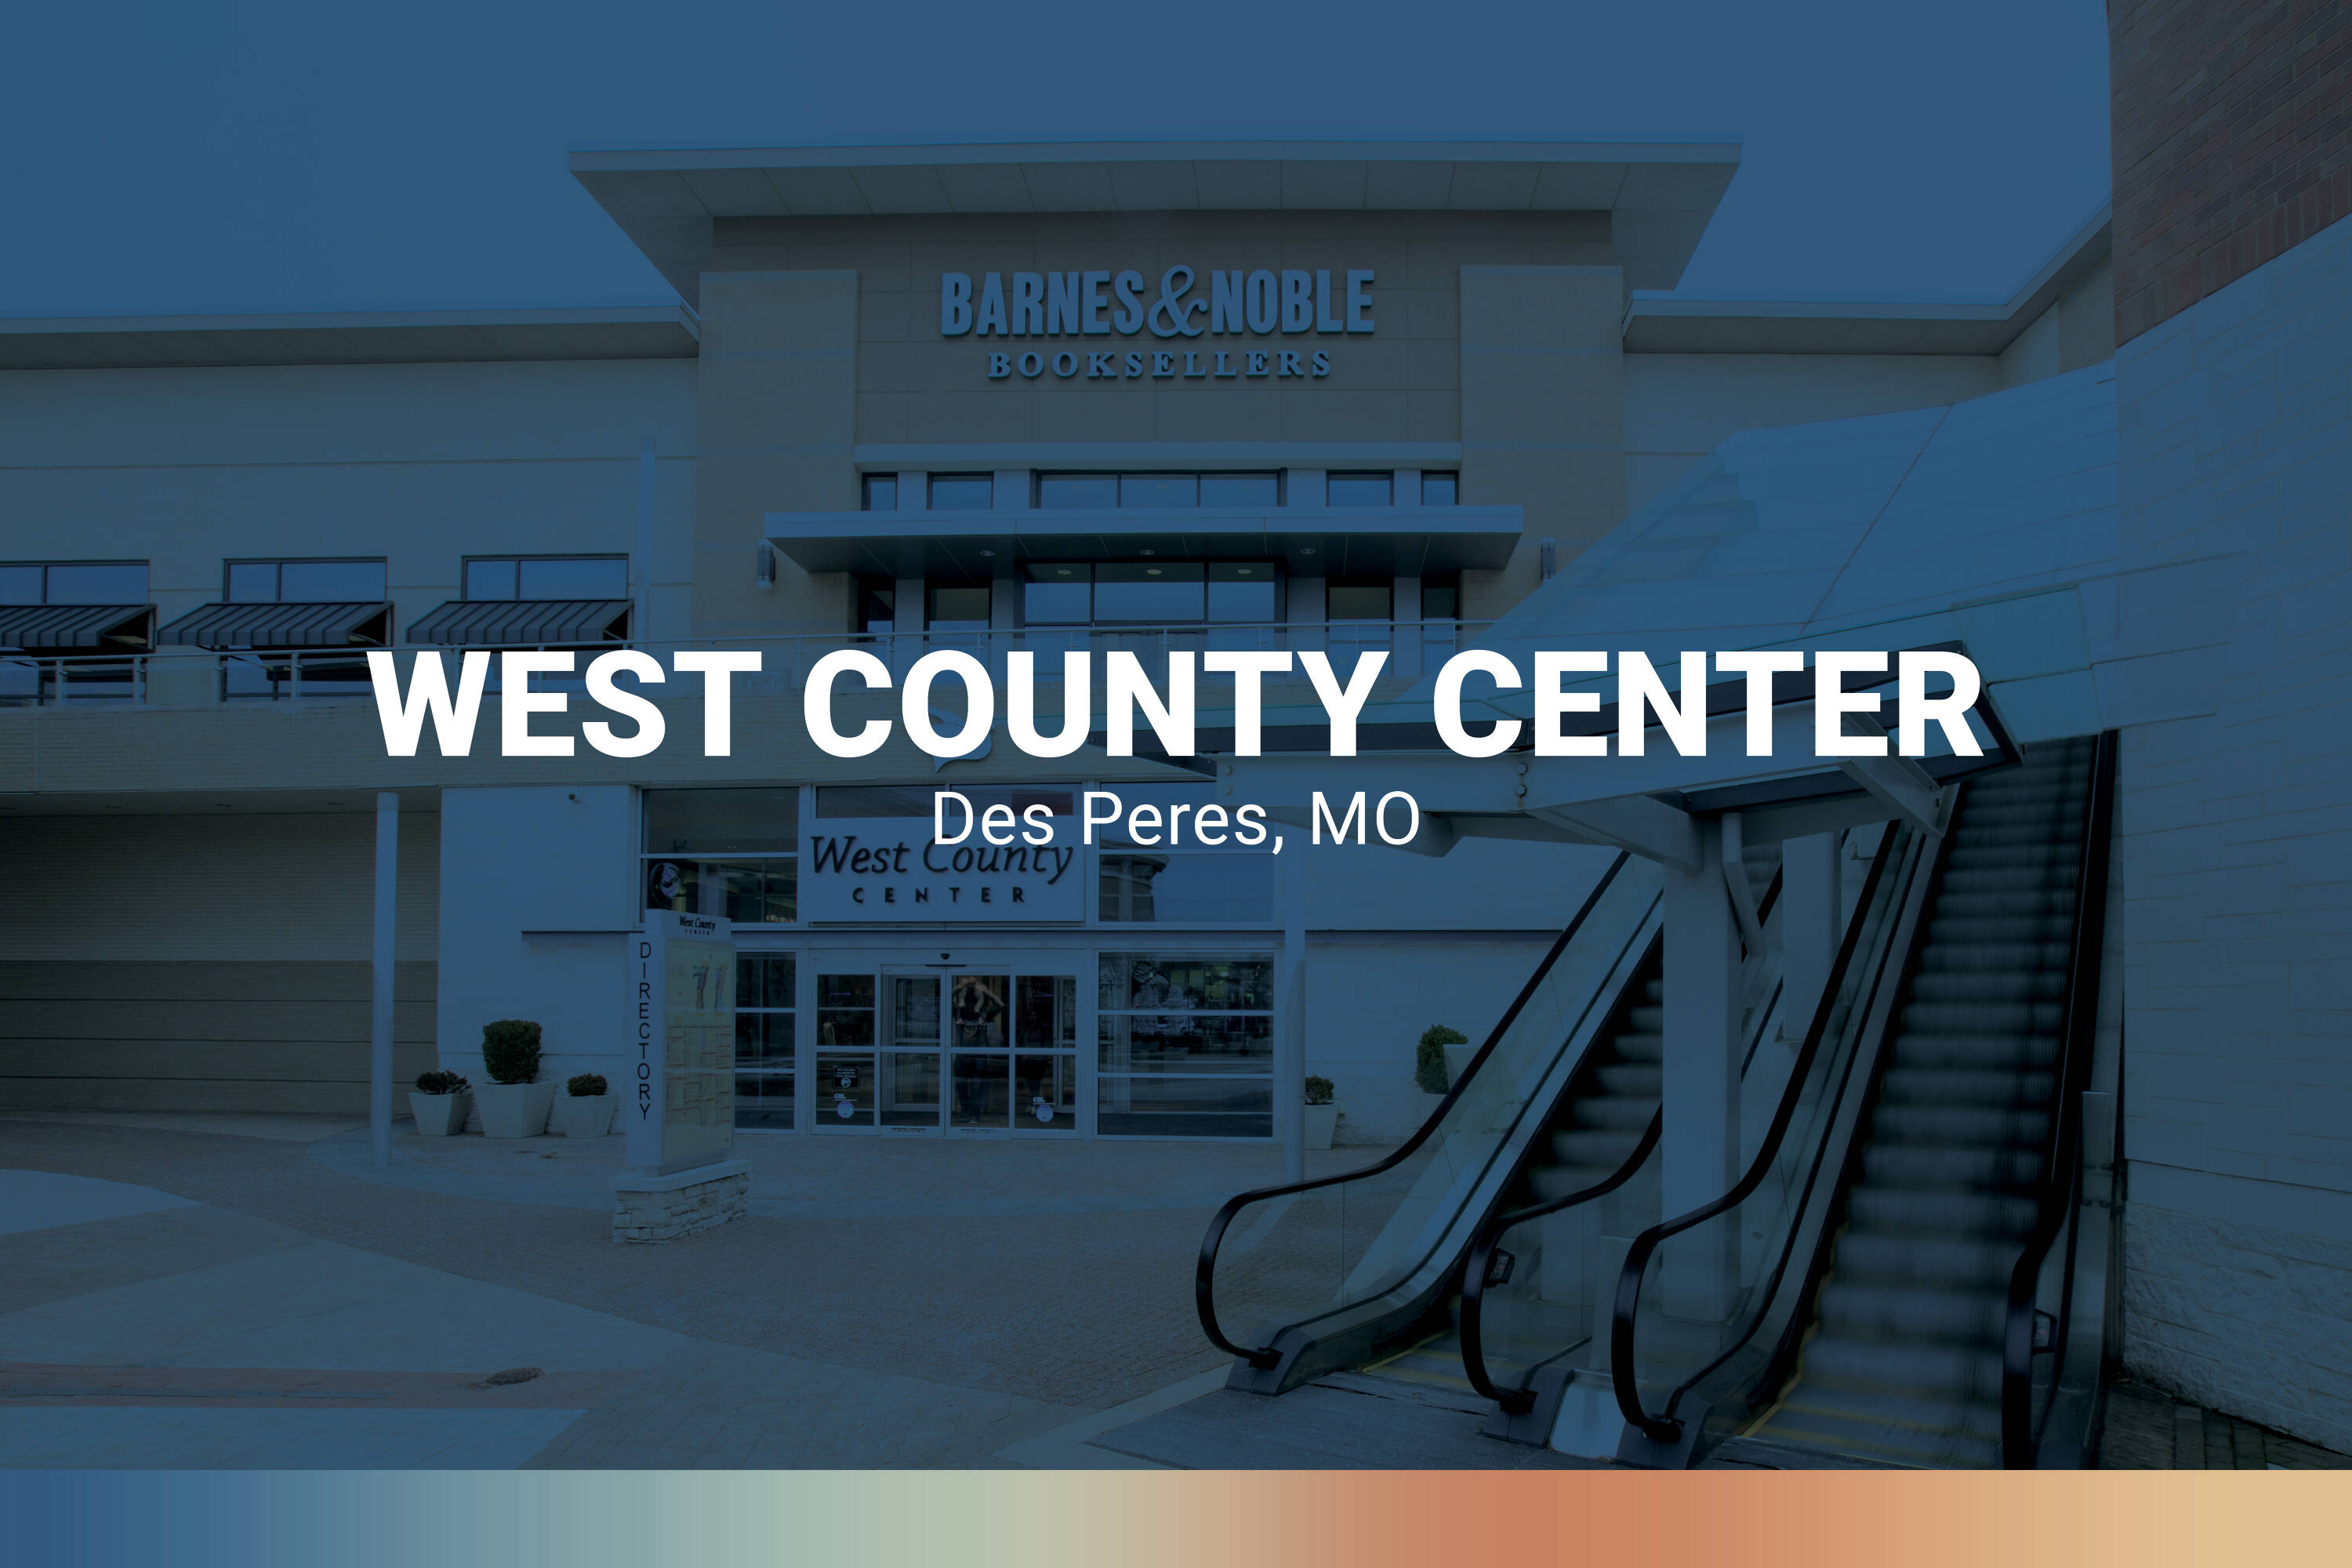 Mall Directory  West County Center